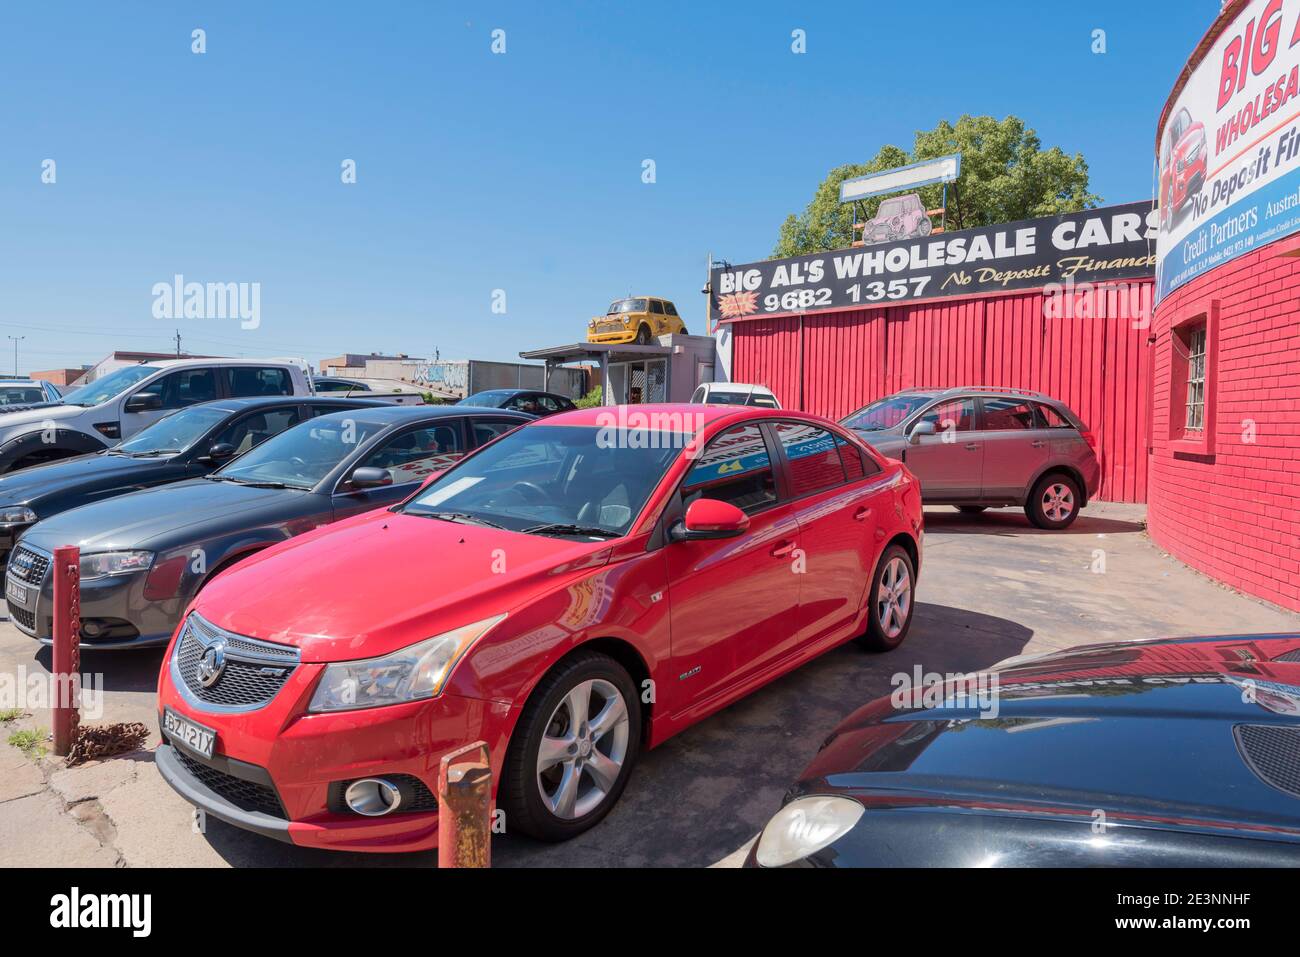 A small, independent used car dealership, Big Al's, on Parramatta Road (Great Western Highway) in western Sydney, Australia Stock Photo